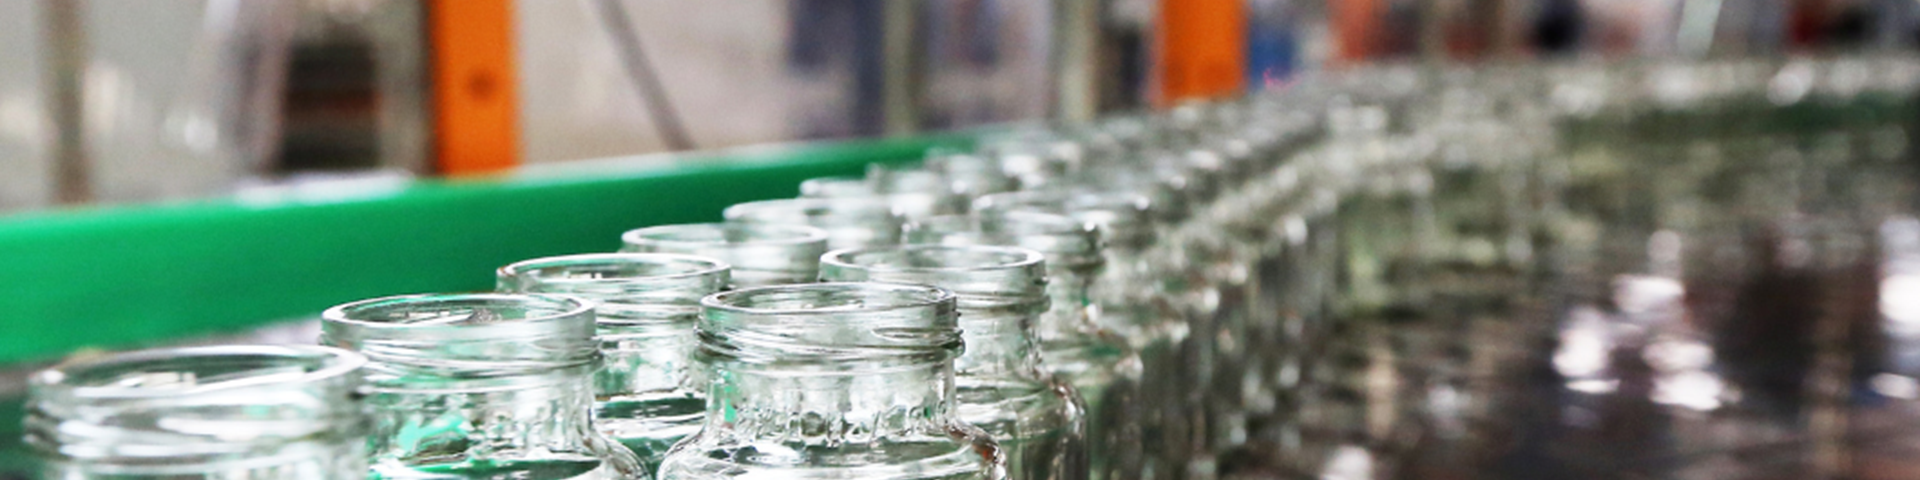 Production line of glass jars - manufacturing insurance